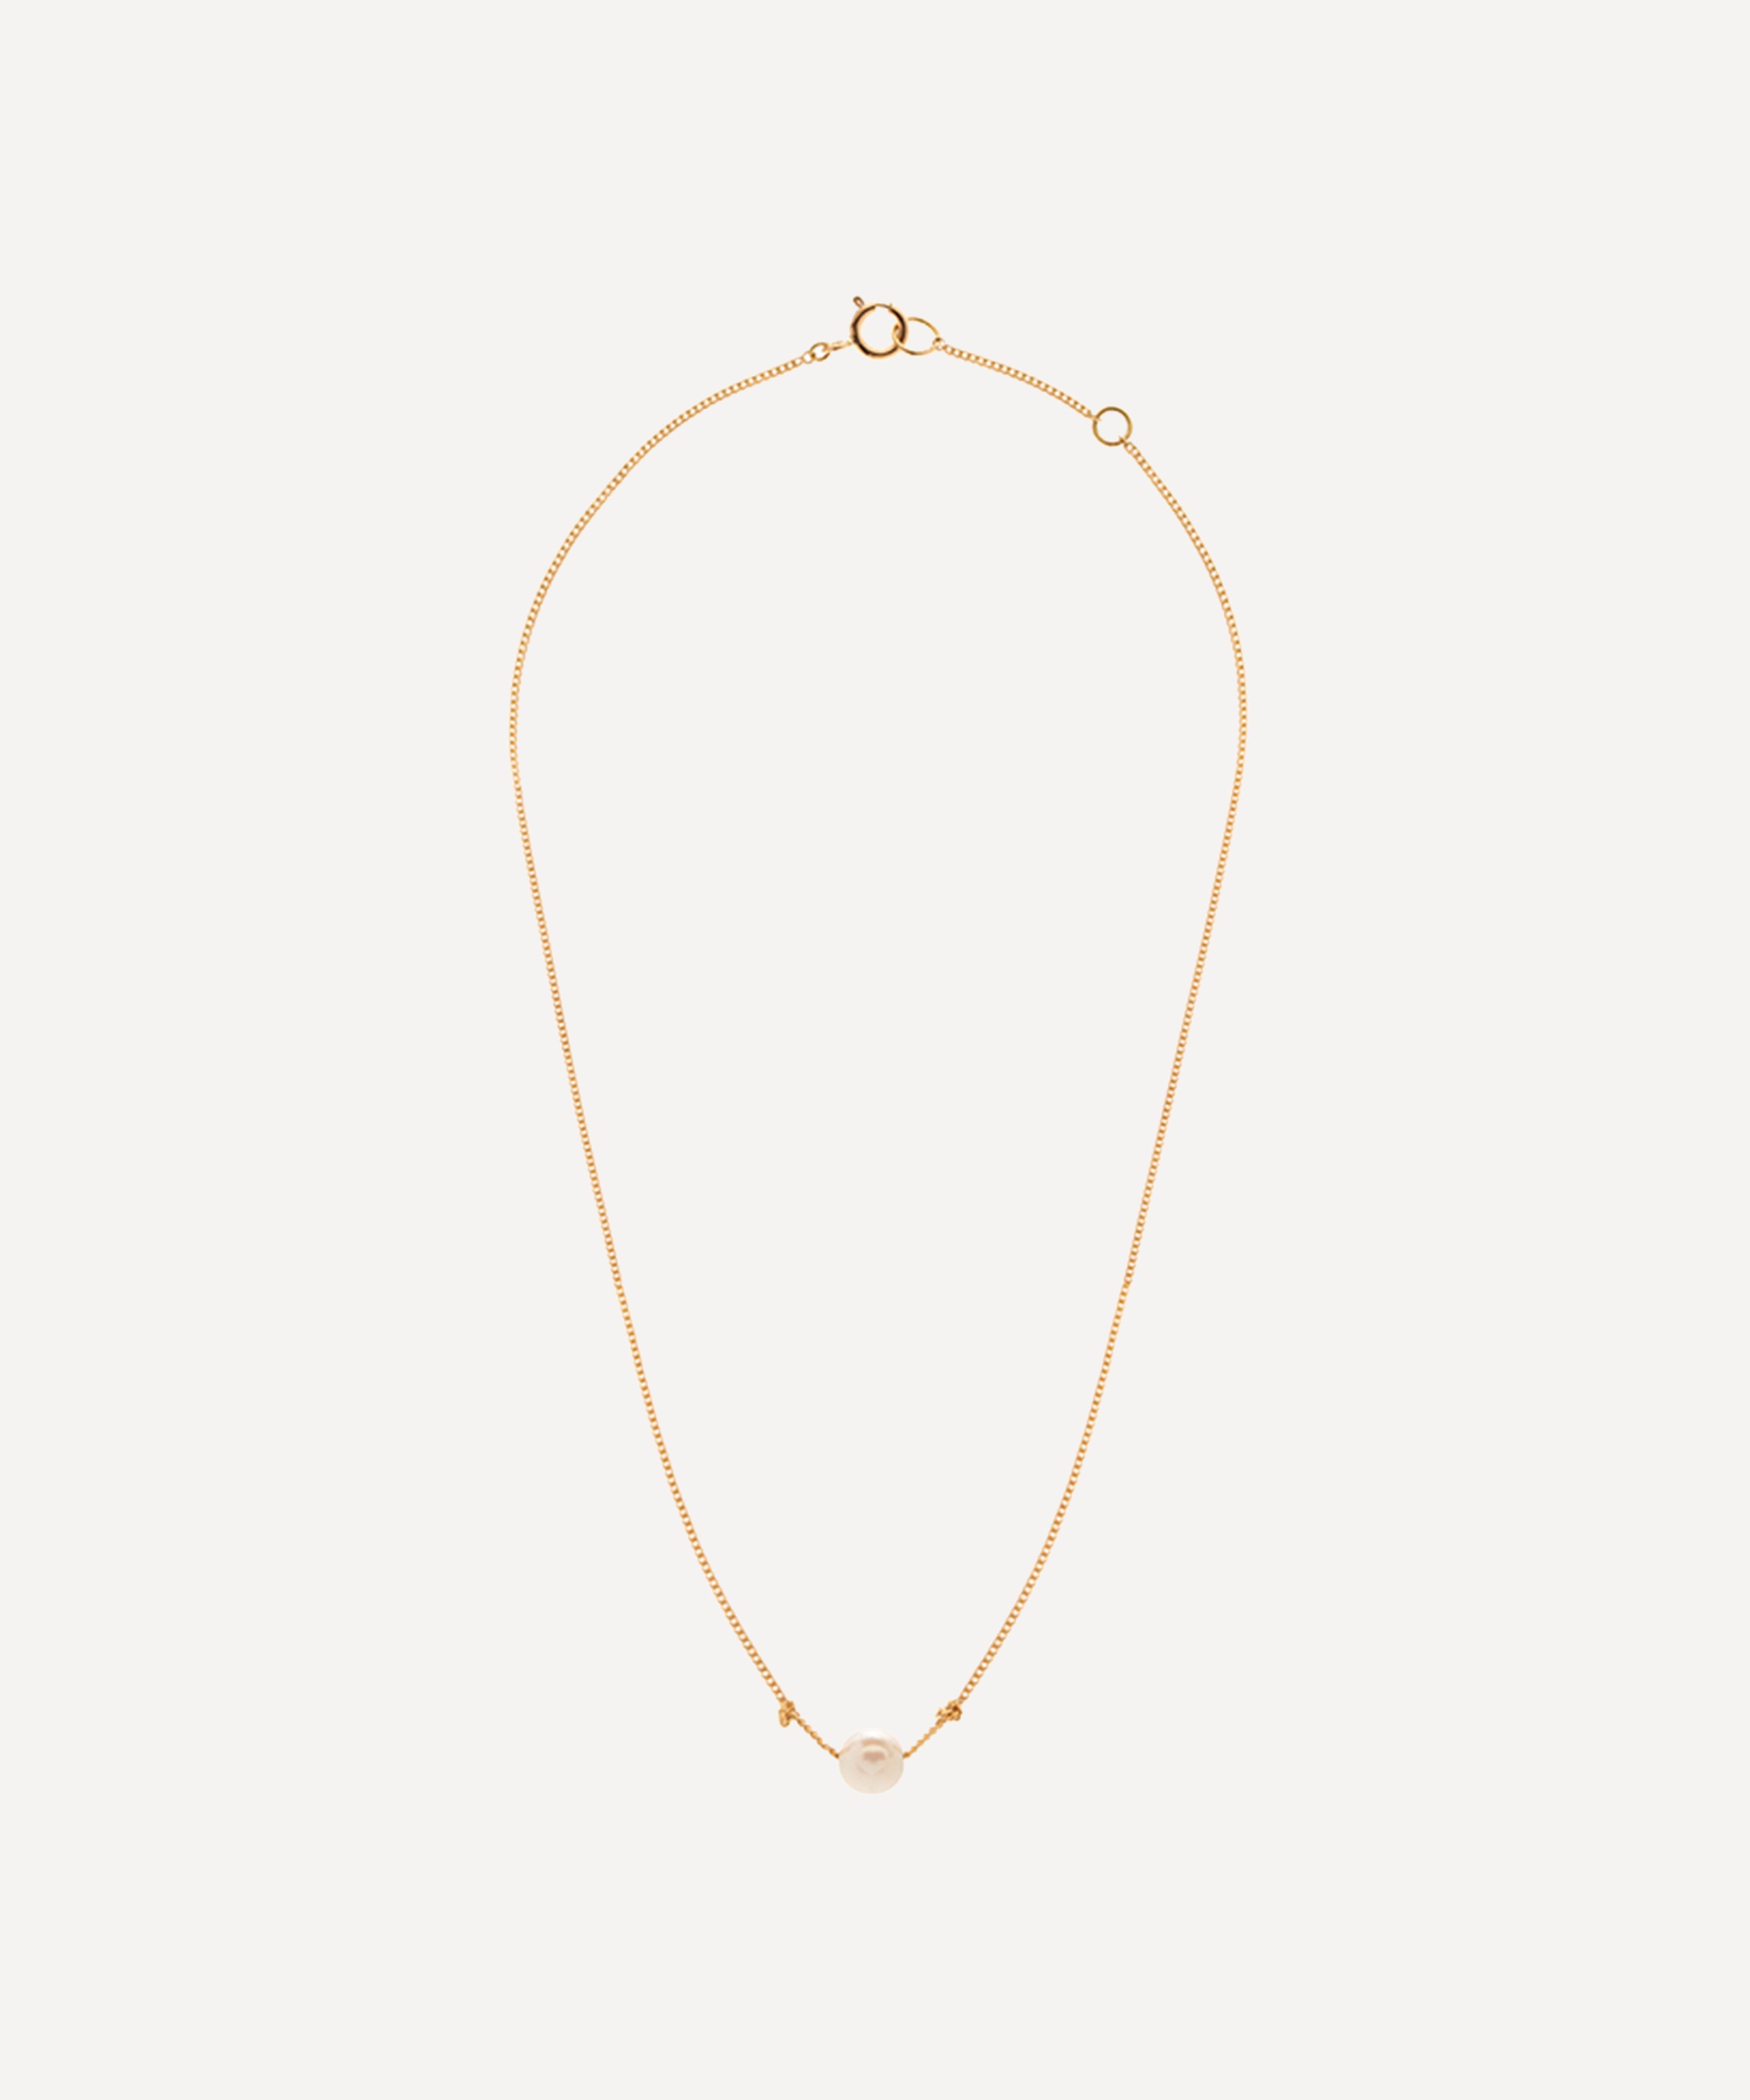 Atelier VM - 18ct Gold Day Pearl Necklace